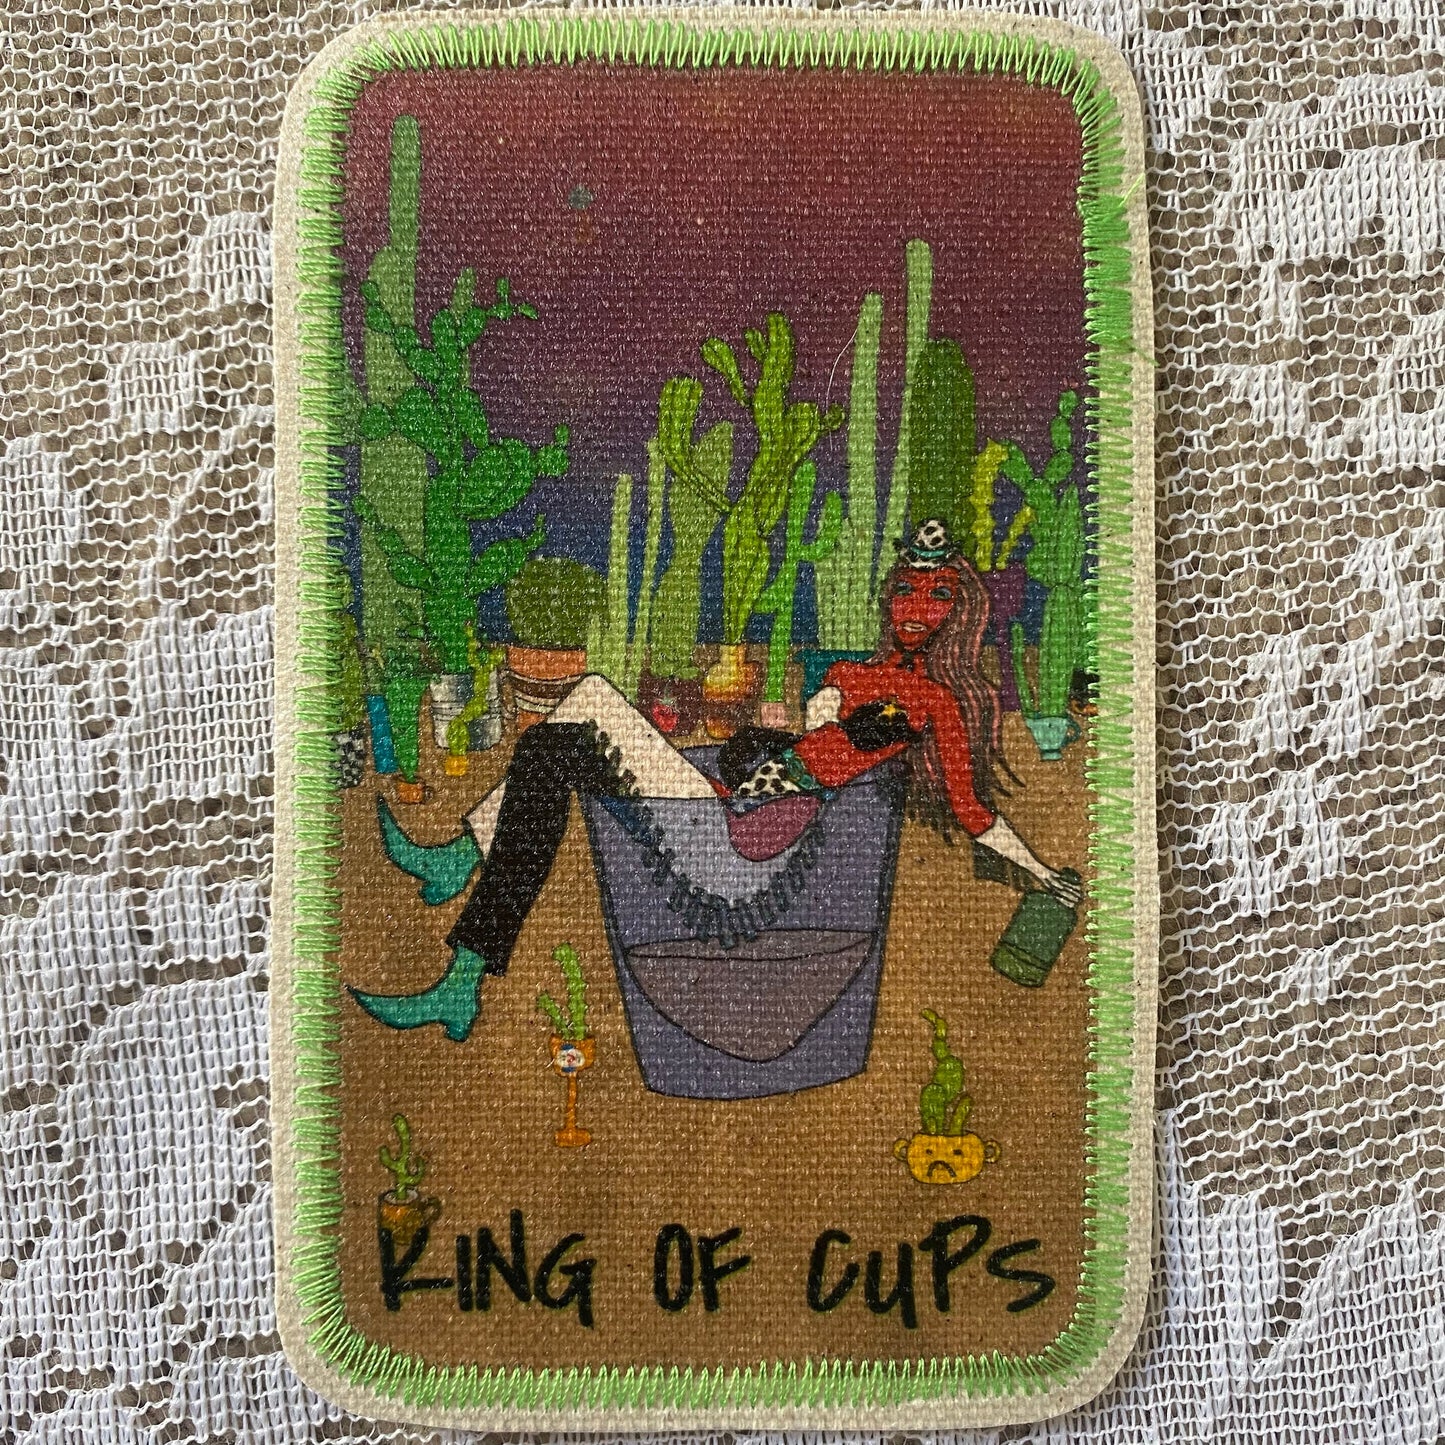 King of Cups Canvas Patch